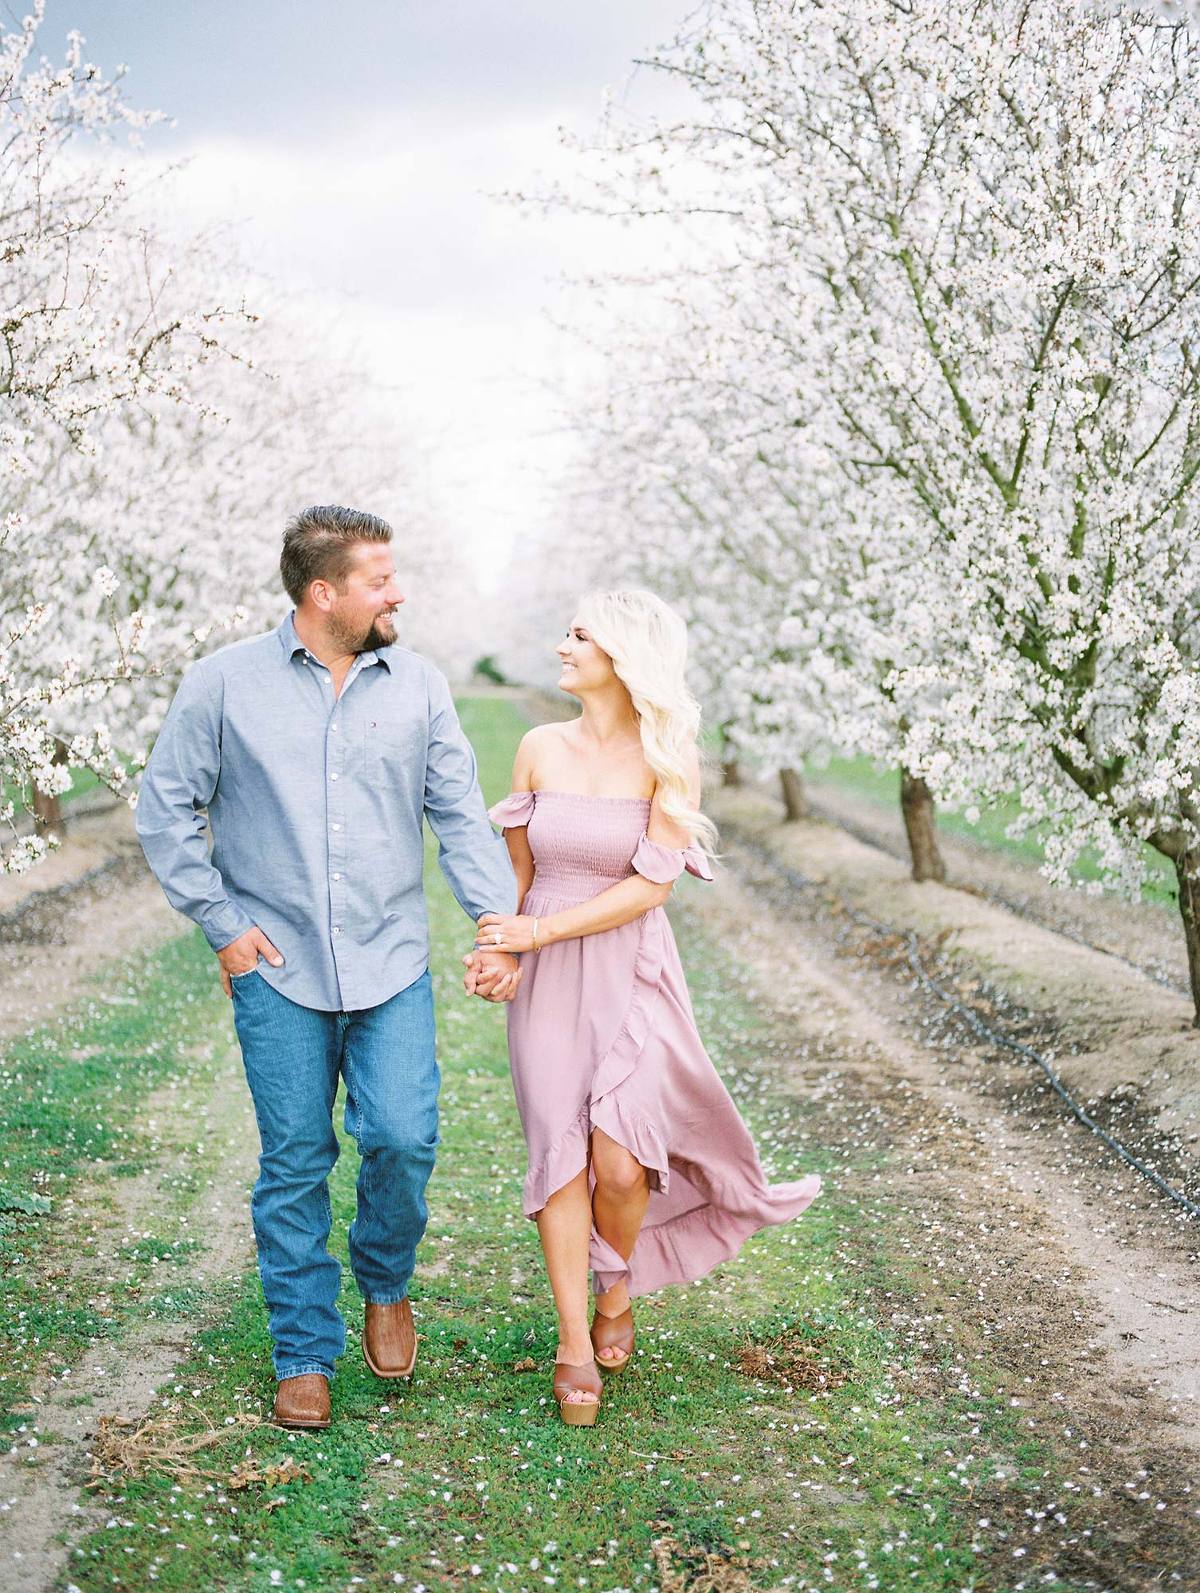 couple holding hands walking through an almond blossom orchard on a cloudy day